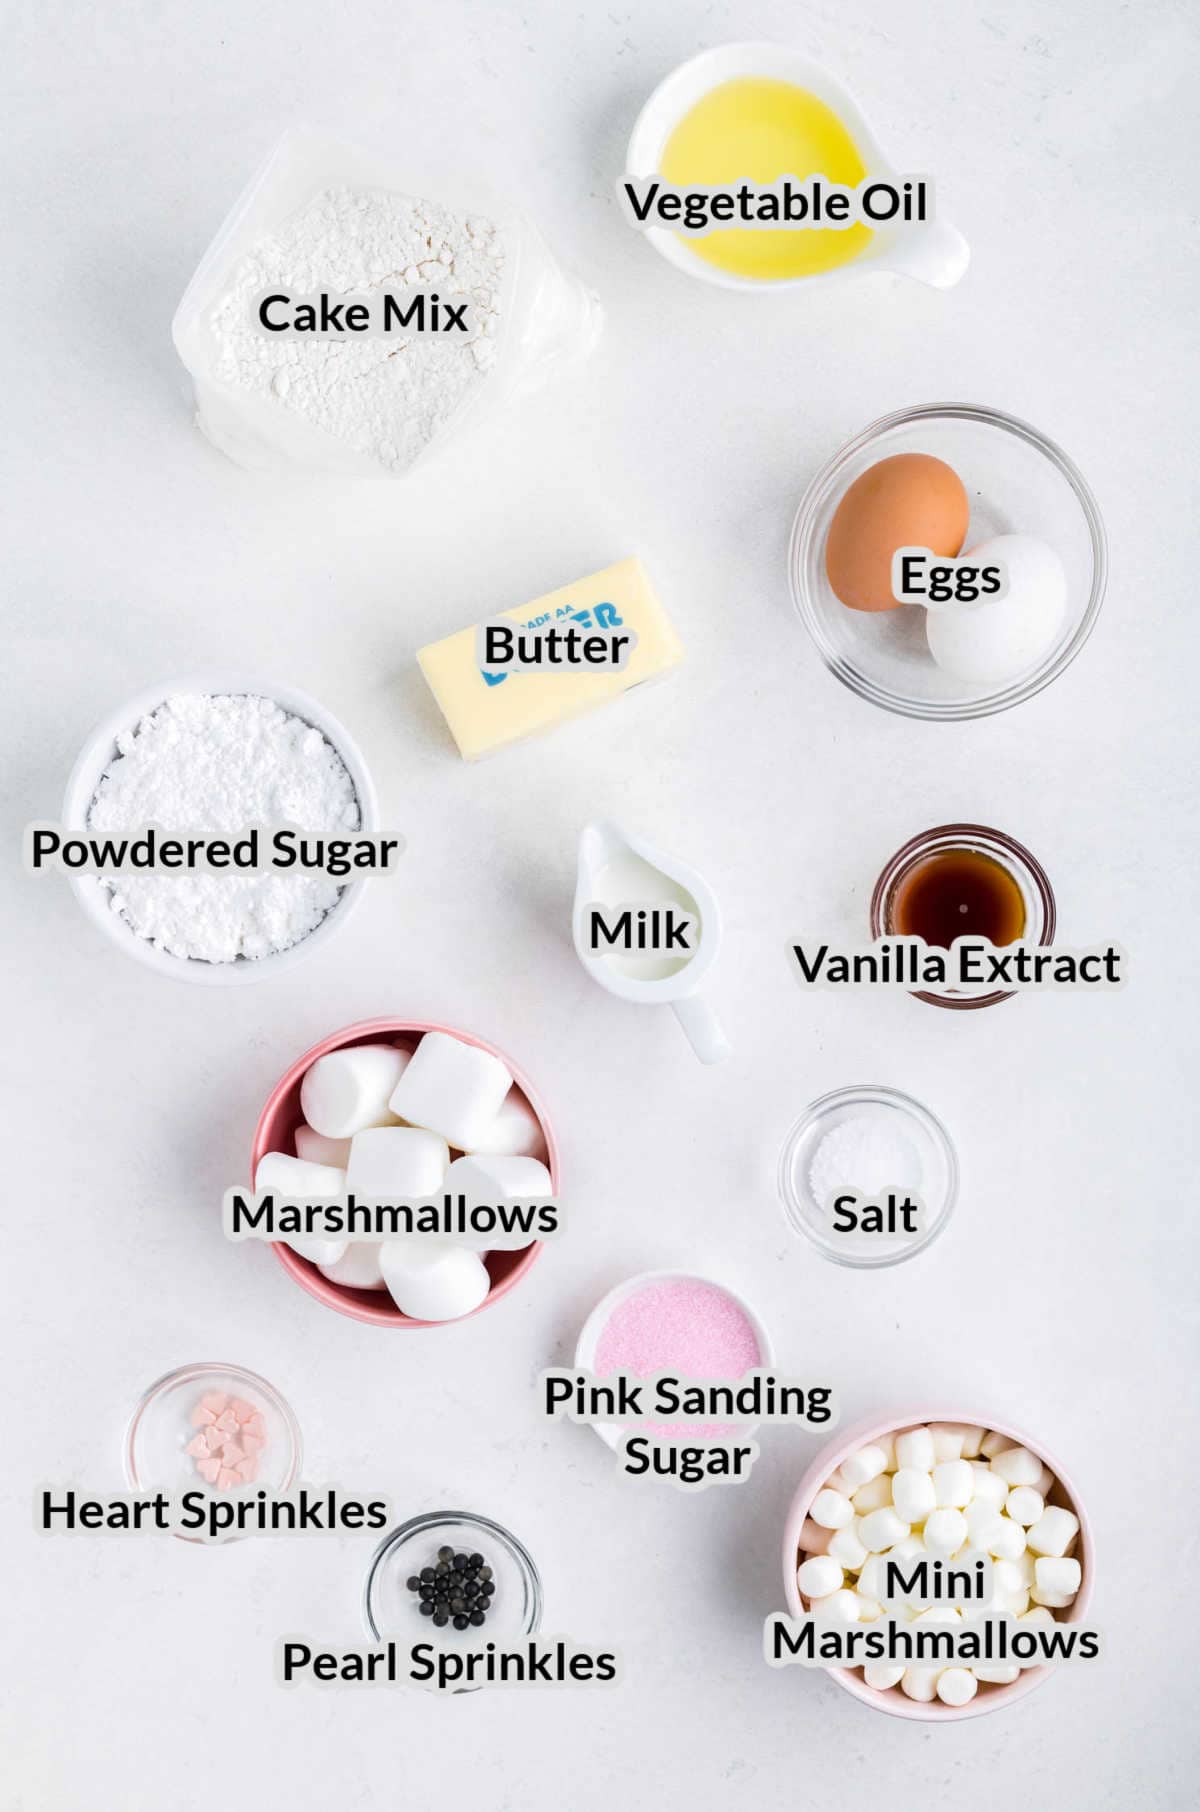 Overhead Image of the Bunny Face Cookies Ingredients